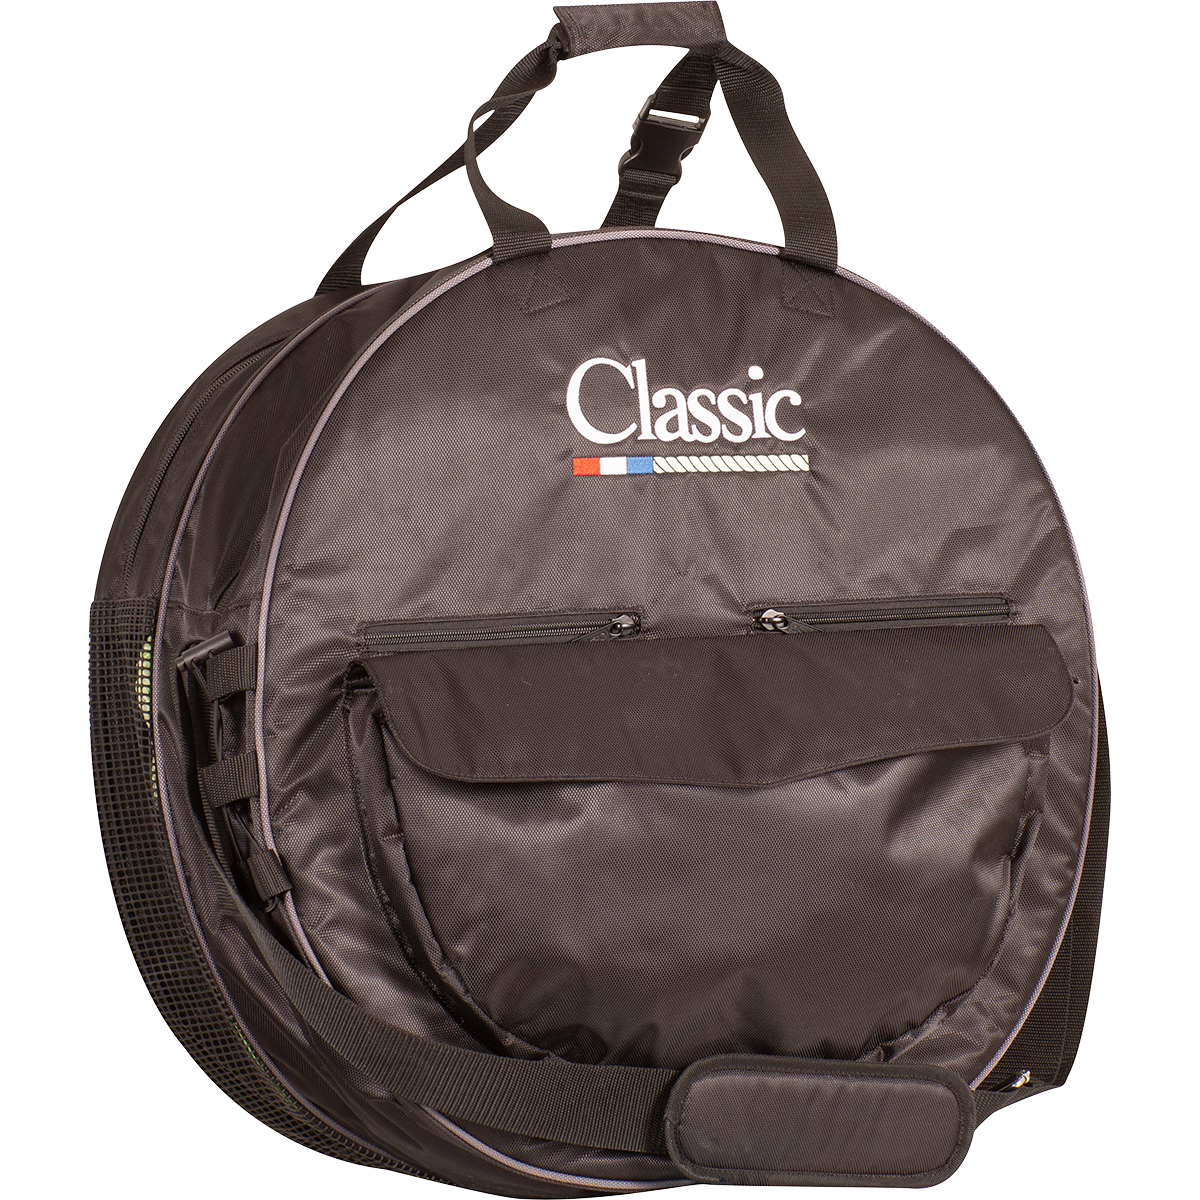 Classic Equine Deluxe Rope Bag